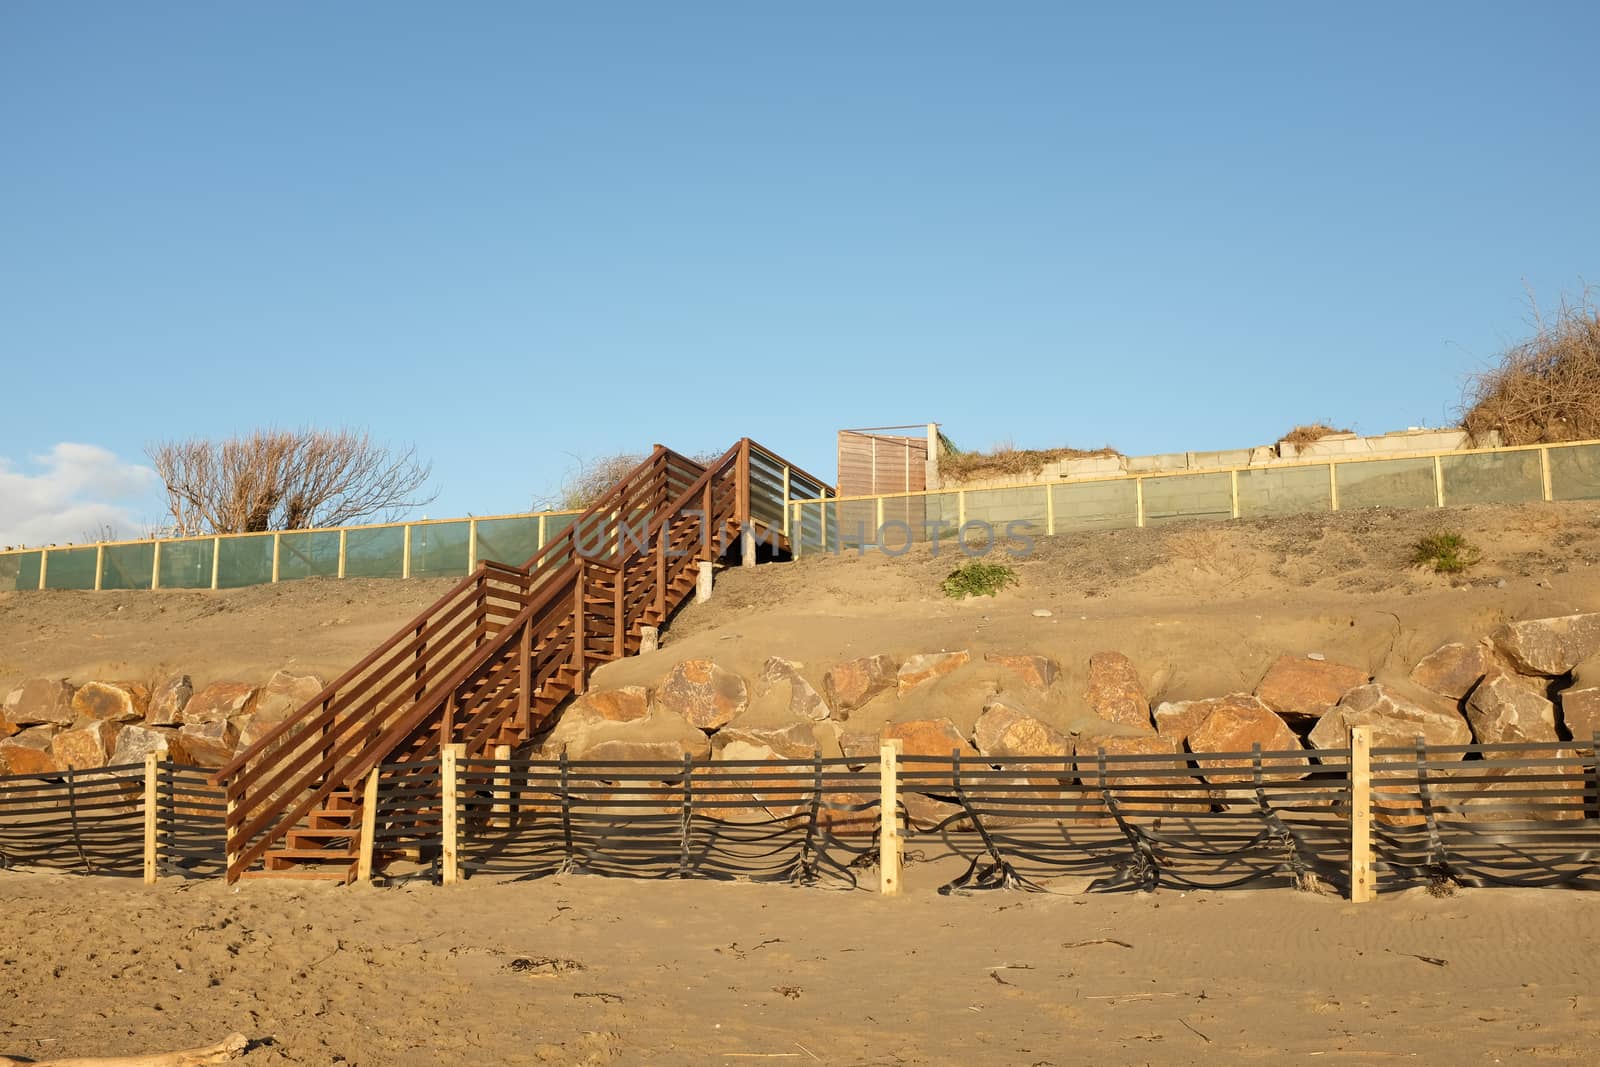 A set of wooden stairs, steps, built over a constructed dune with sand drift fence, base rock and overlayed sand.